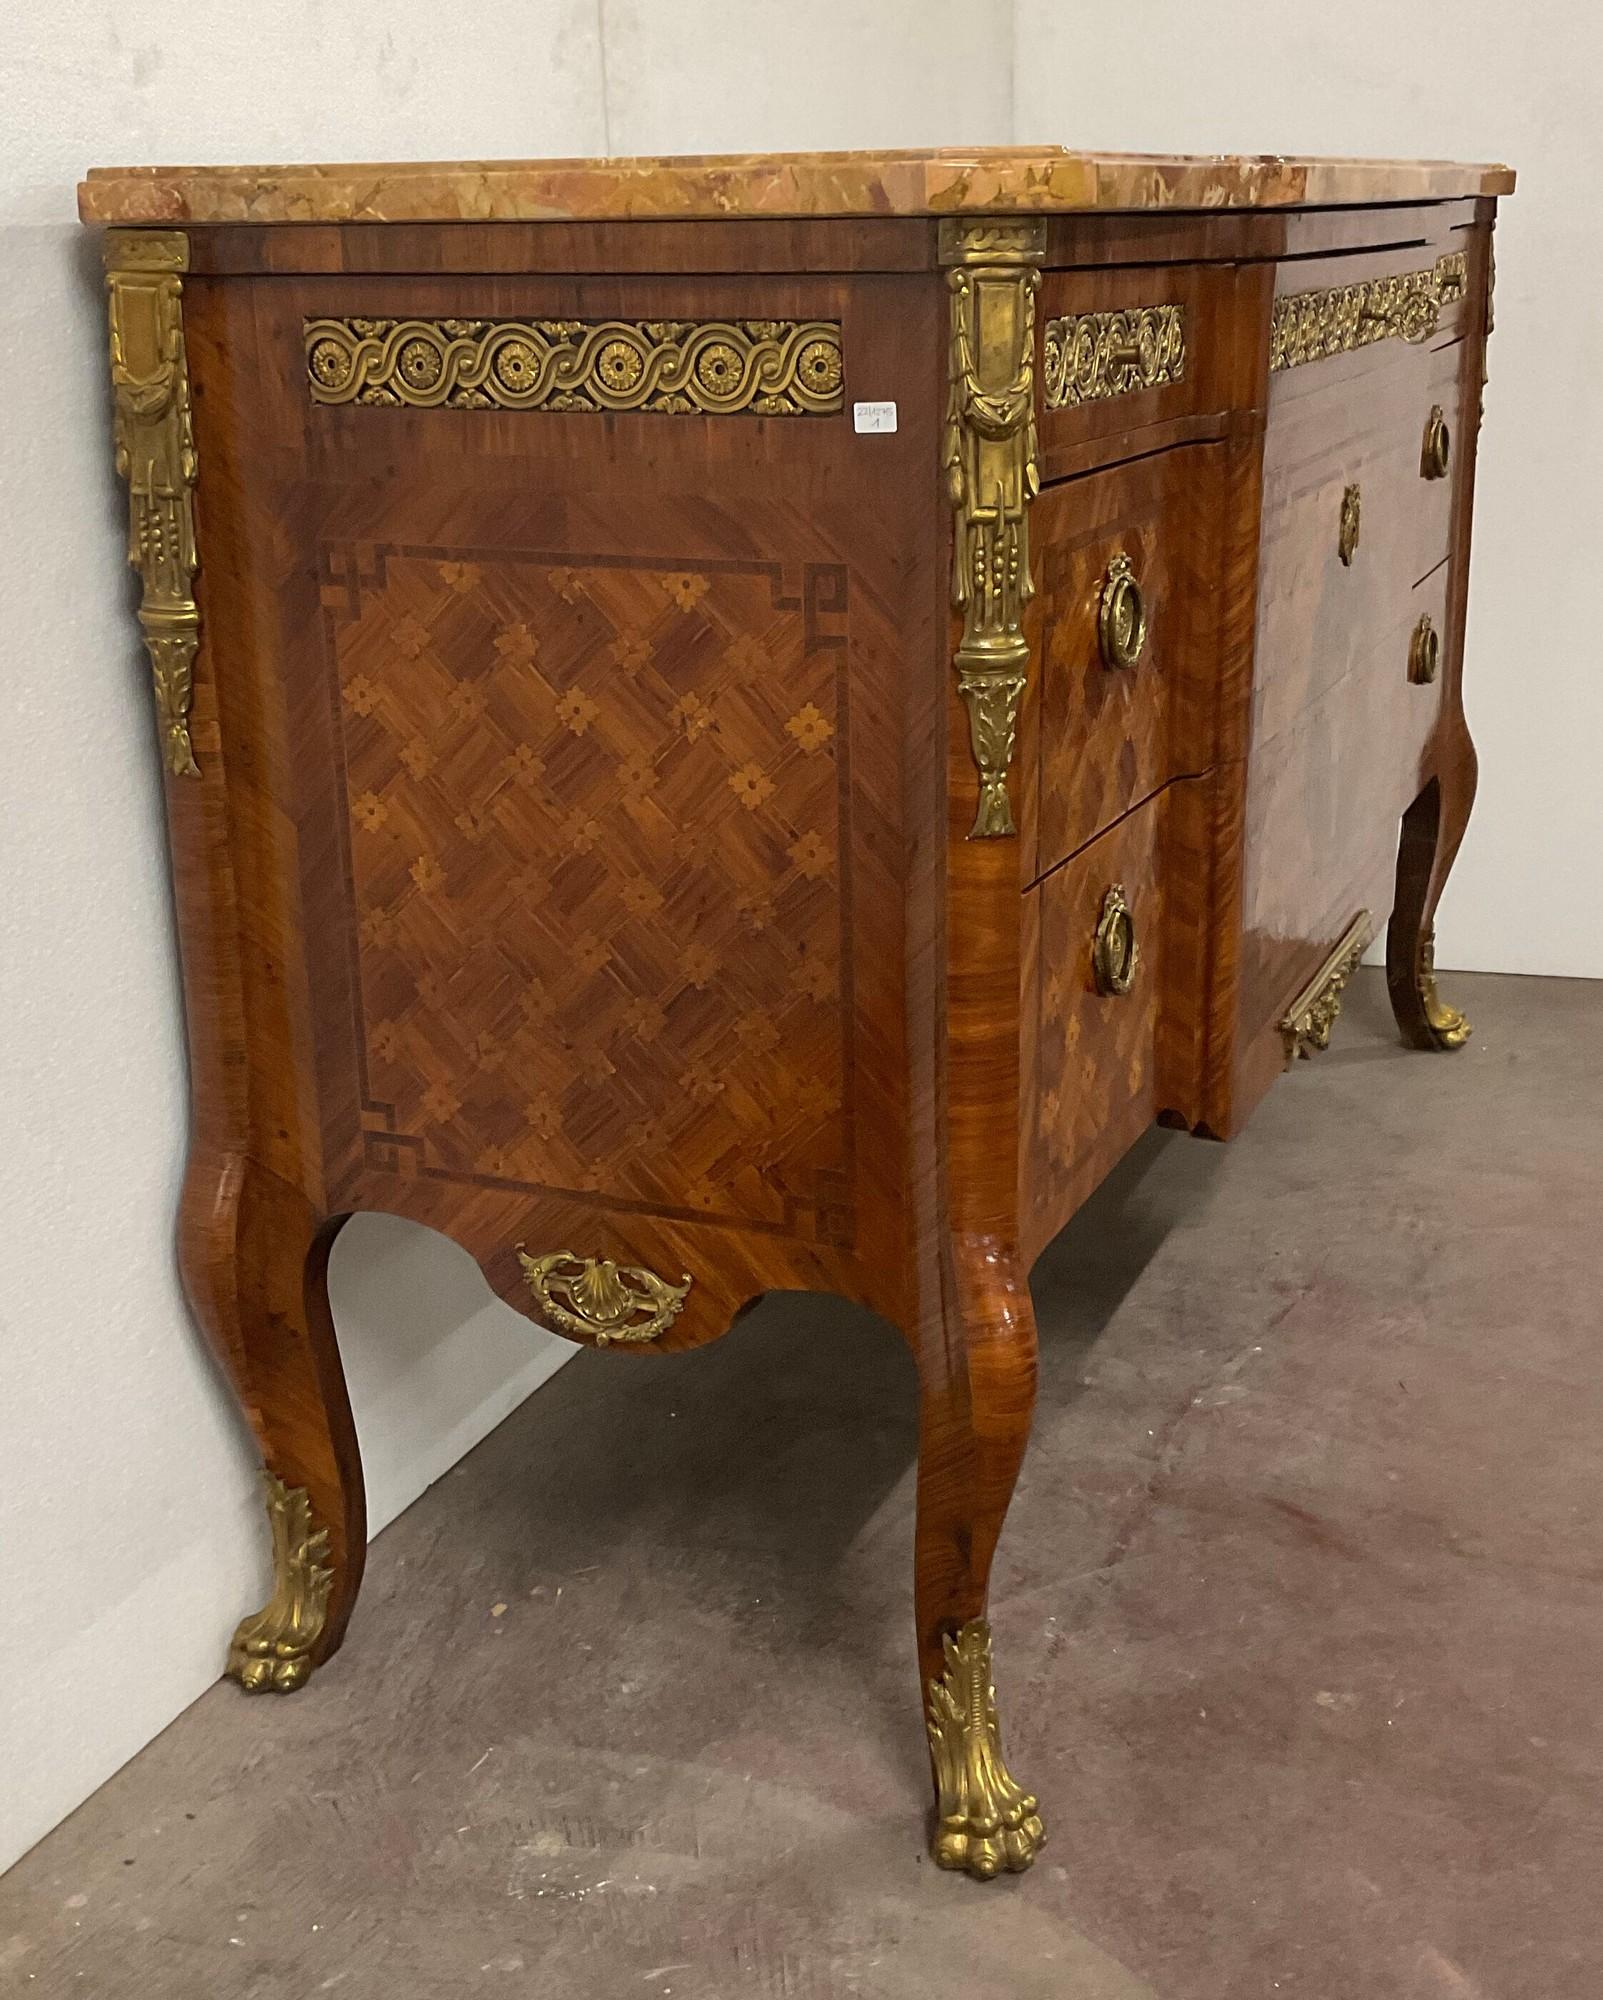 Very nice chest of drawers with 6 drawers and a door on the front, inlaid with flowers and geometric patterns, and rich bronze ornamentation: quiver, lion's paws

Good general condition, slight wear from time
Veined marble with a small lack

Early